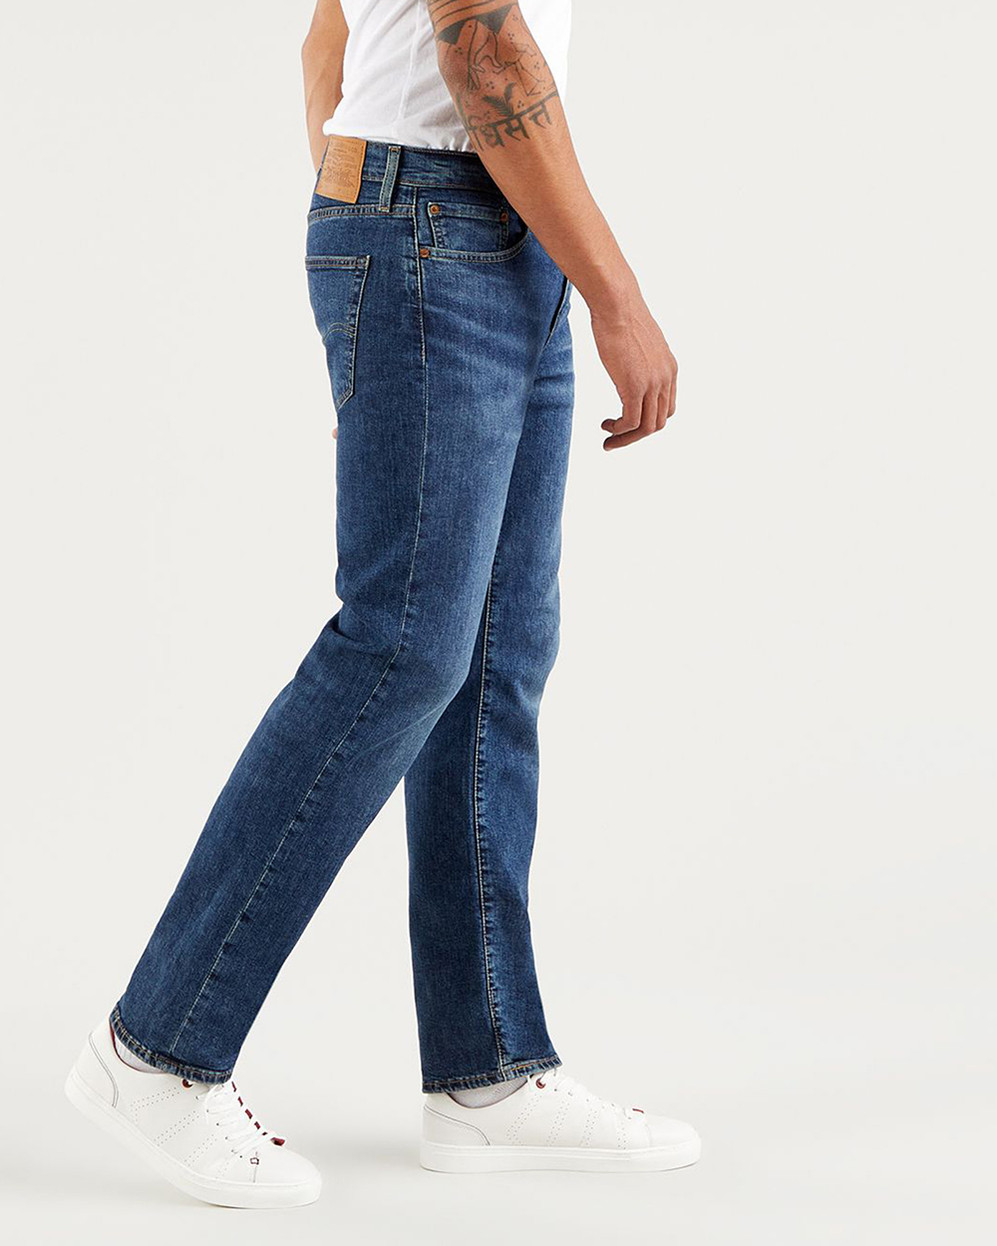 Levi's® 514 Relaxed Straight Mens Jeans - Chain Rinse